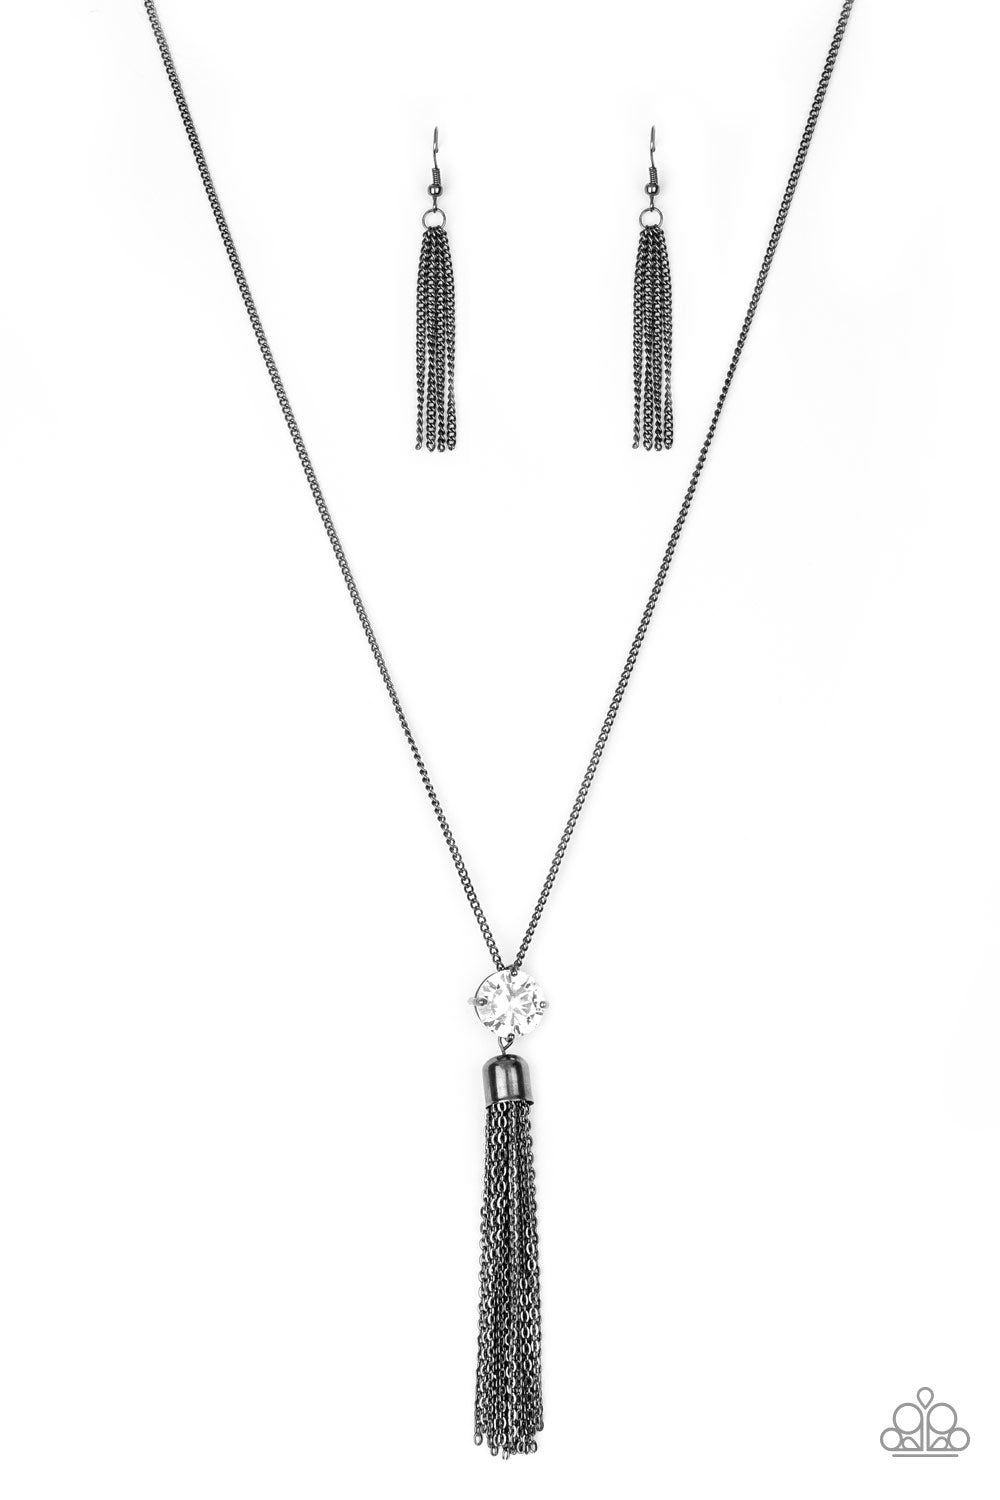 Five-Alarm FIREWORK Paparazzi Accessories Necklace with Earrings - Black